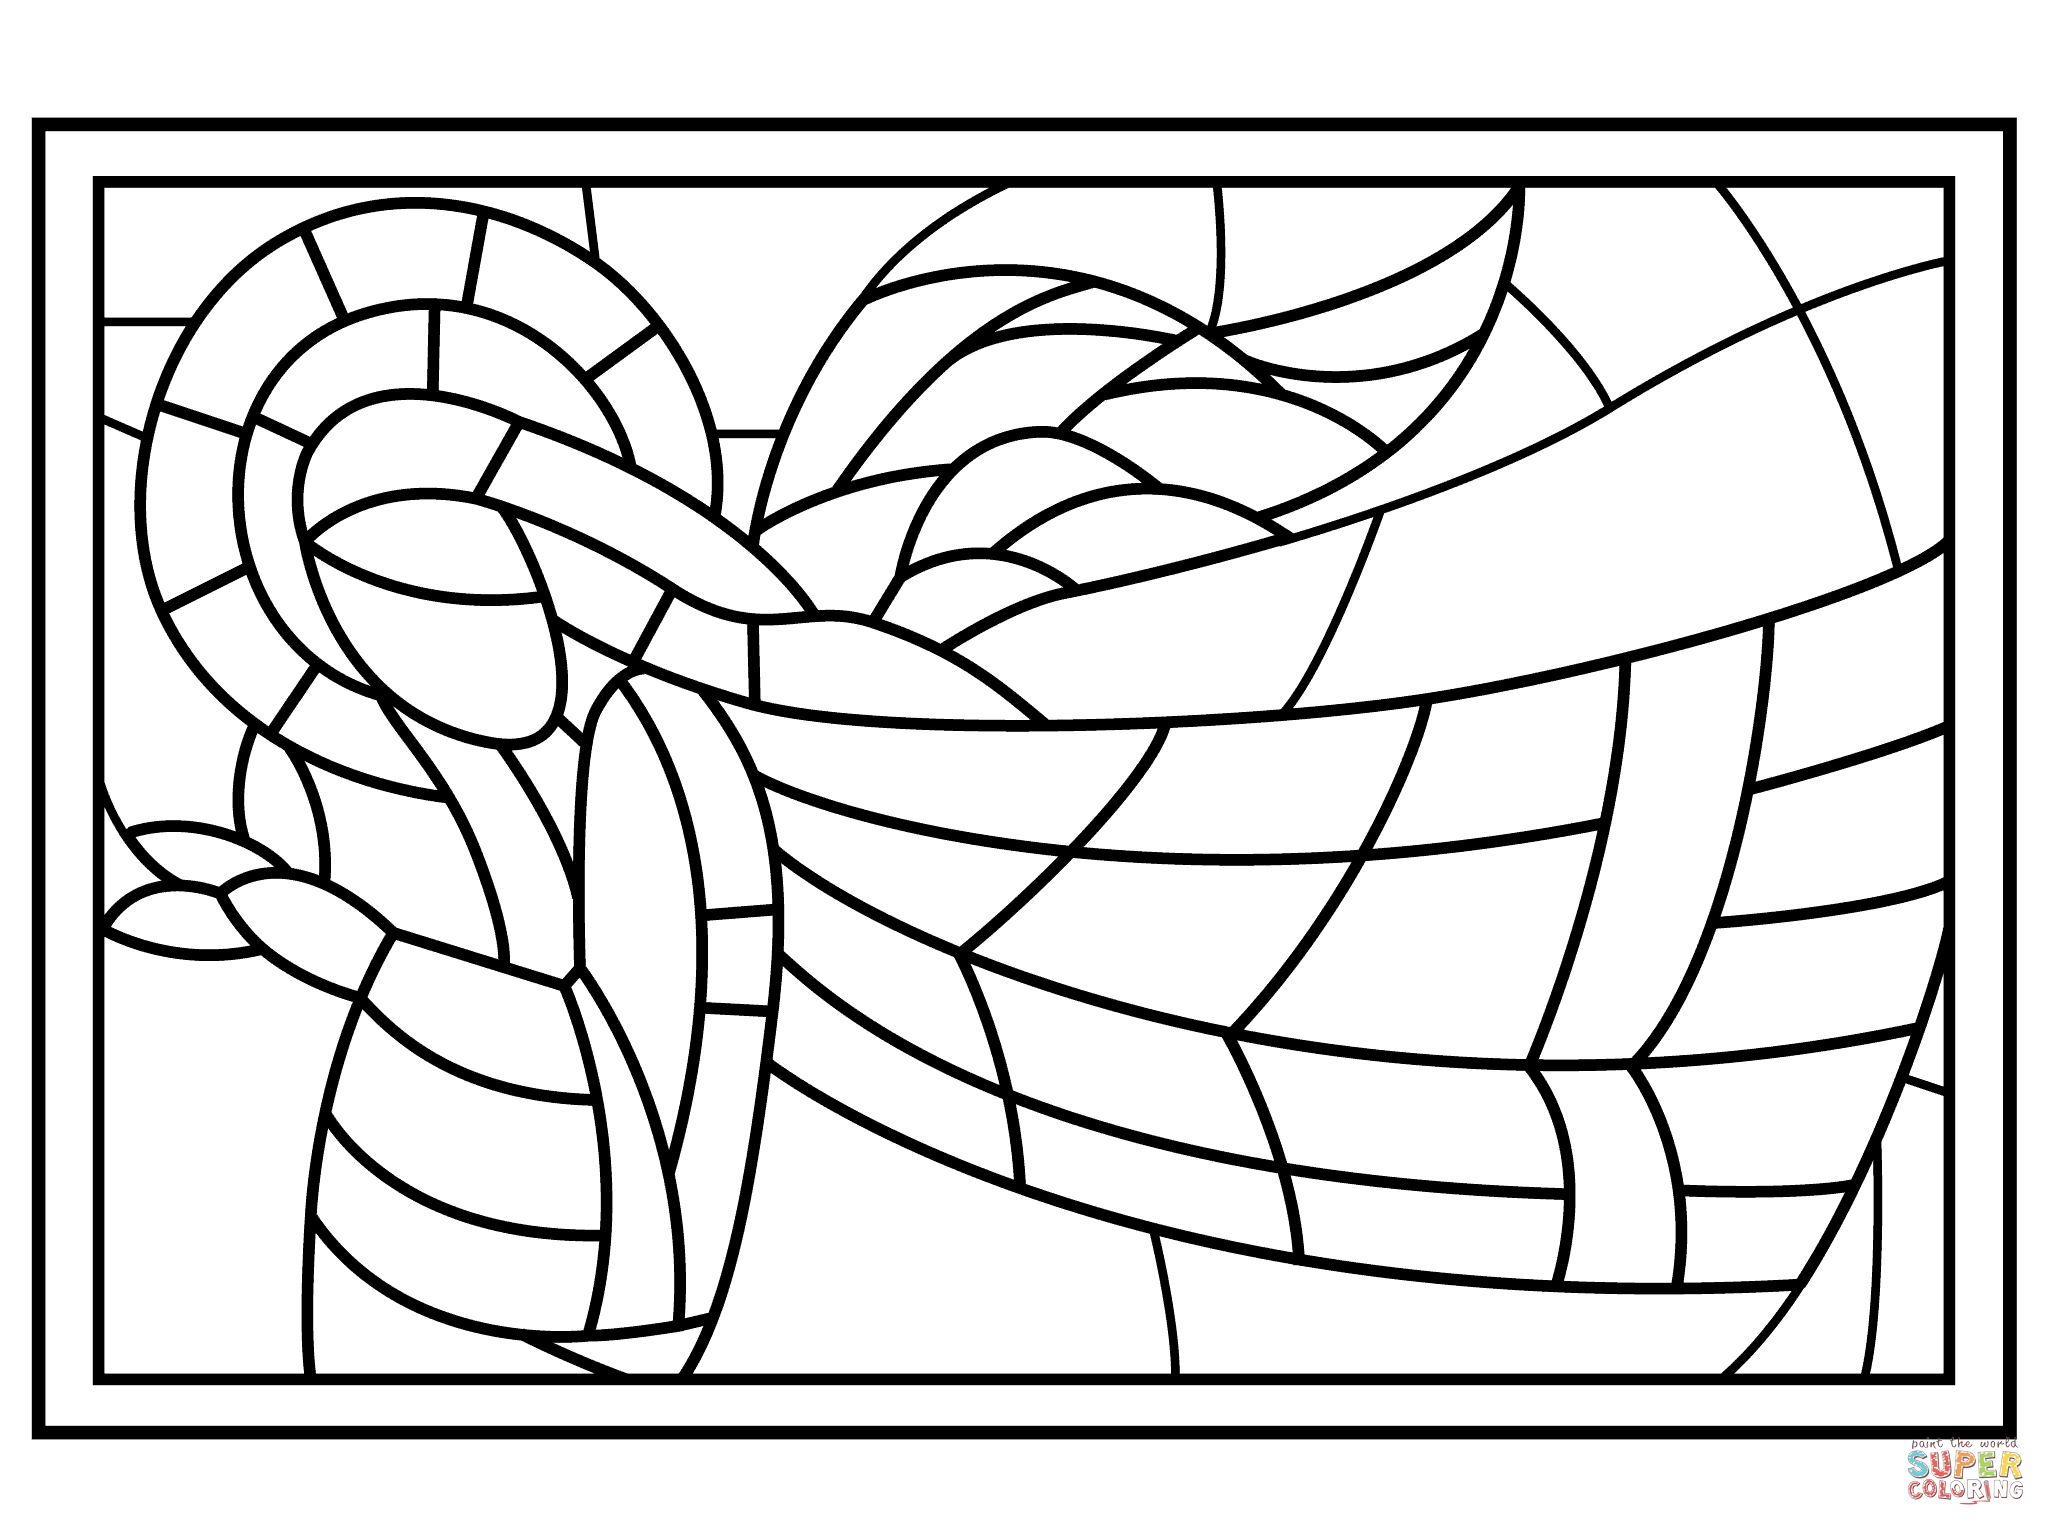 Cross Stained Glass Window coloring page | Free Printable Coloring